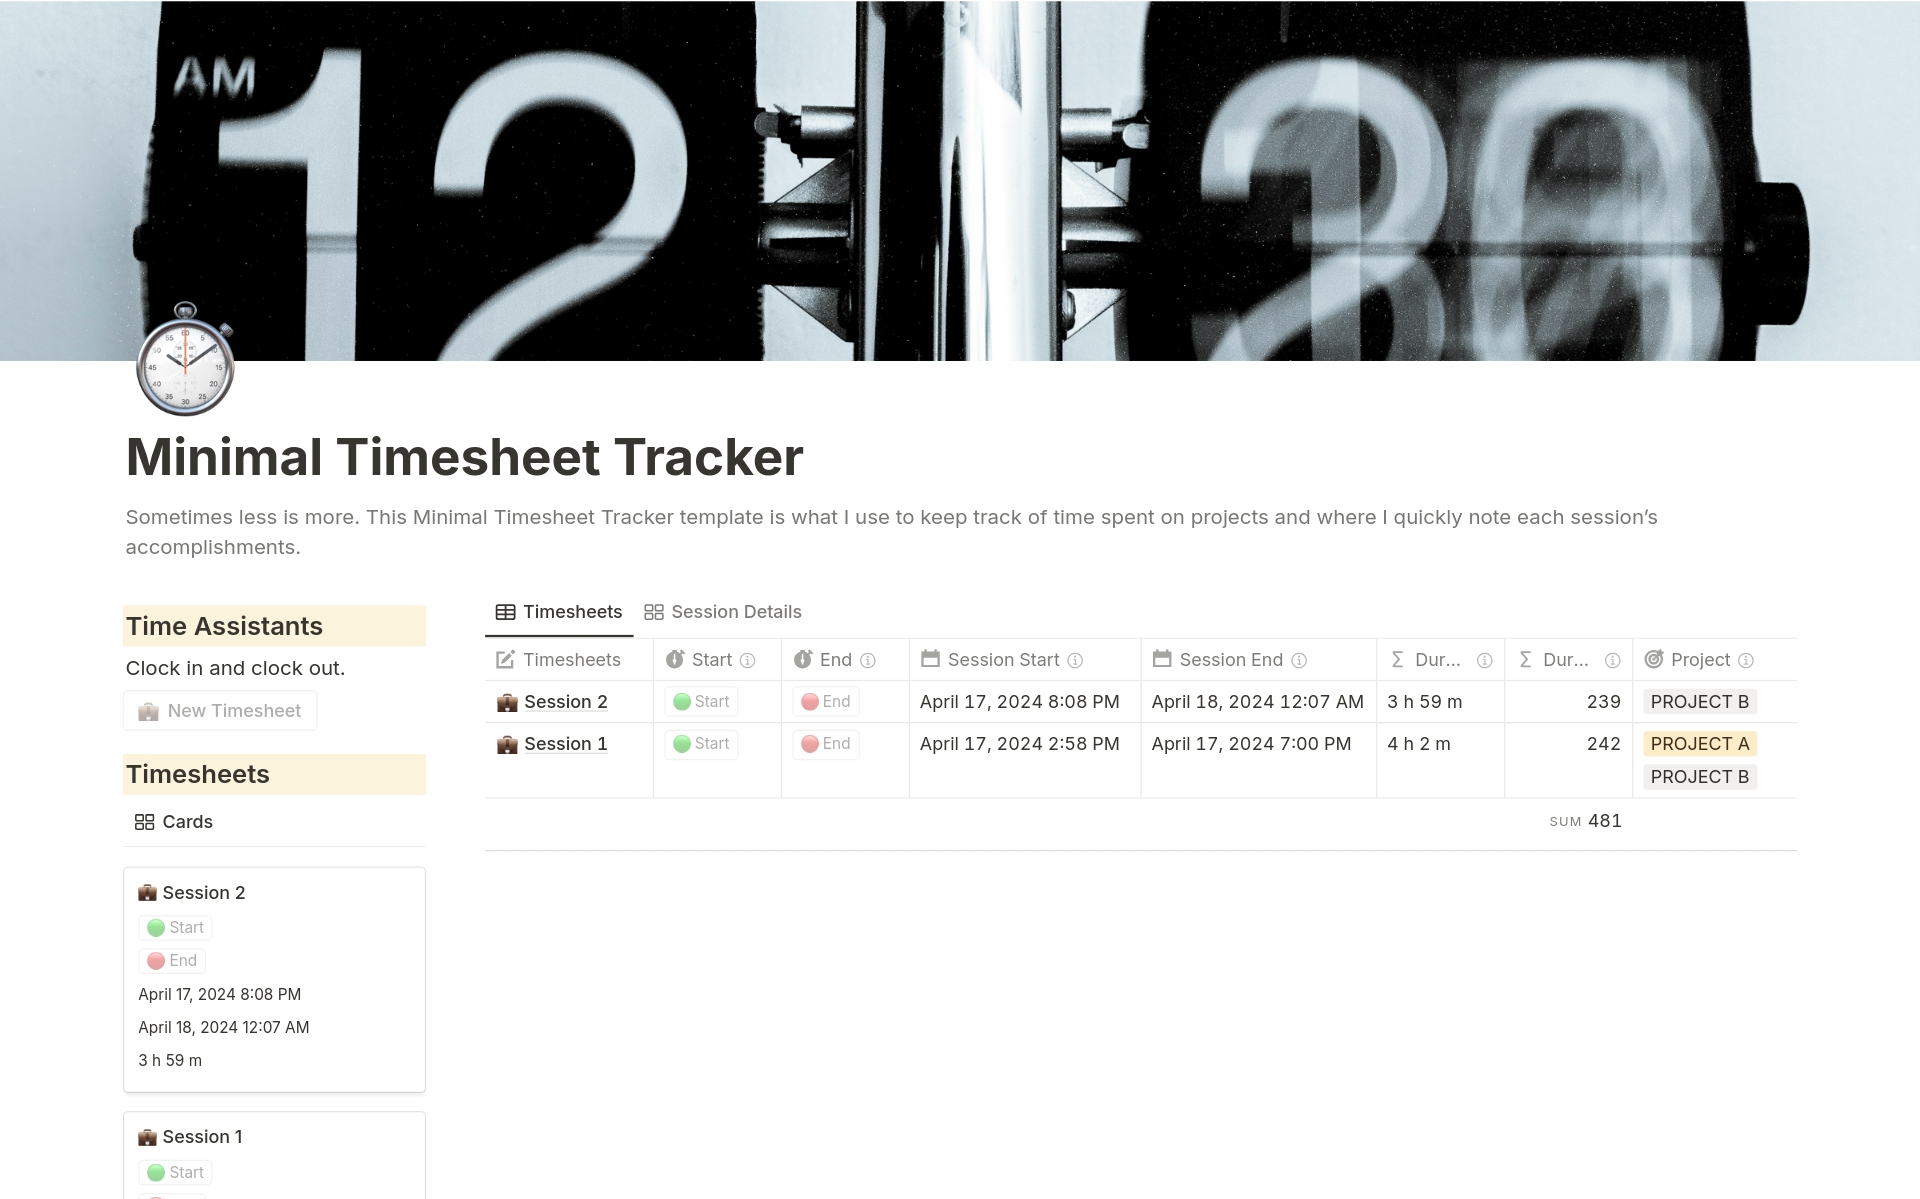 Simple timesheet tool to keep track of time spent on projects.